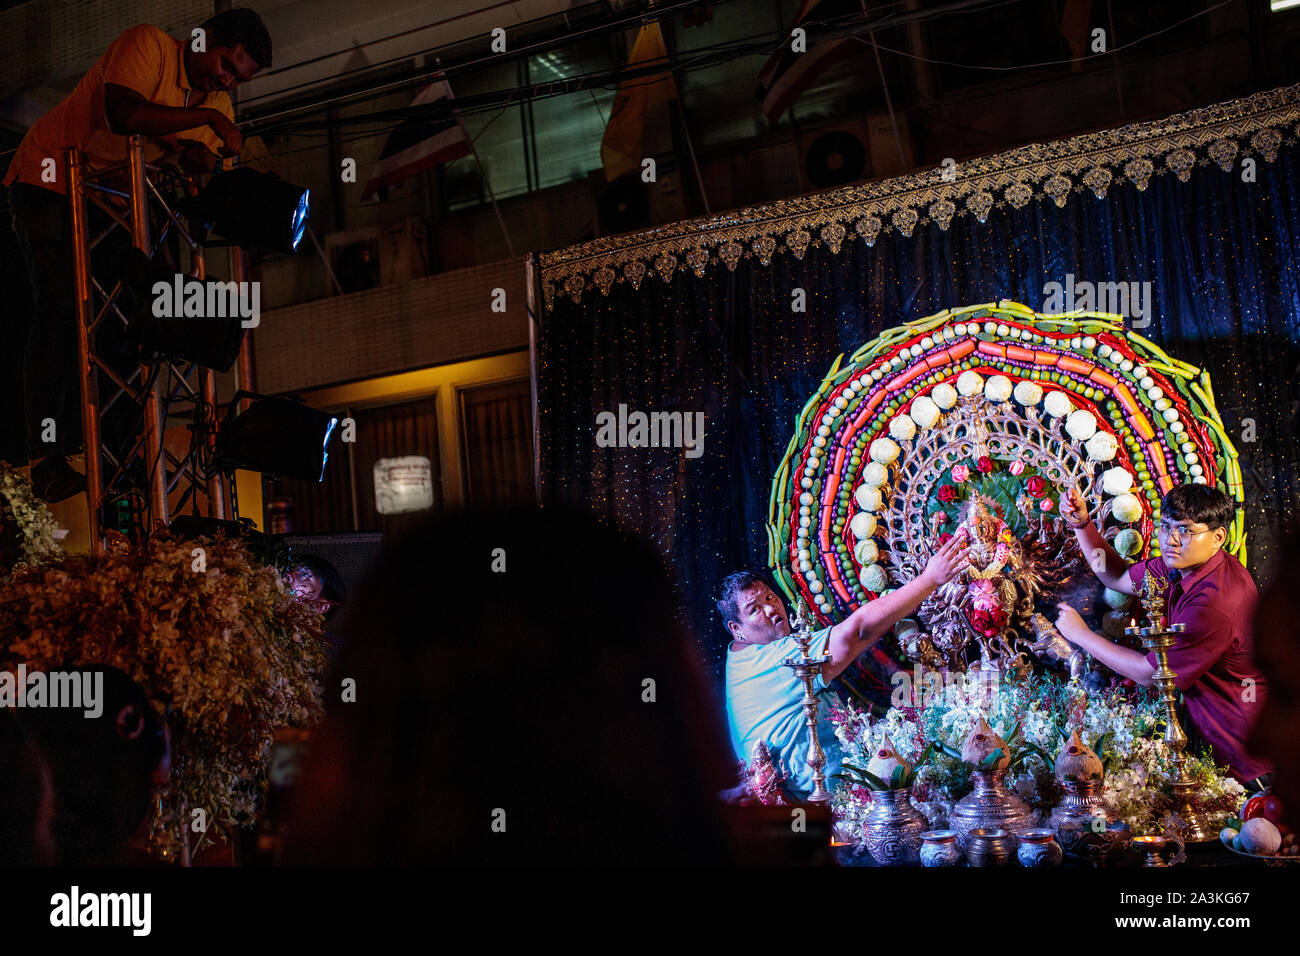 Hindu devotees take part in Navratri celebrations by the Sri Mariamman Temple on October 8, 2019 in Bangkok, Thailand. The widely observed Hindu festival of Navratri celebrates the victory of one of a number of gods, depending on the region, over evil and takes place over nine holy nights. Stock Photo